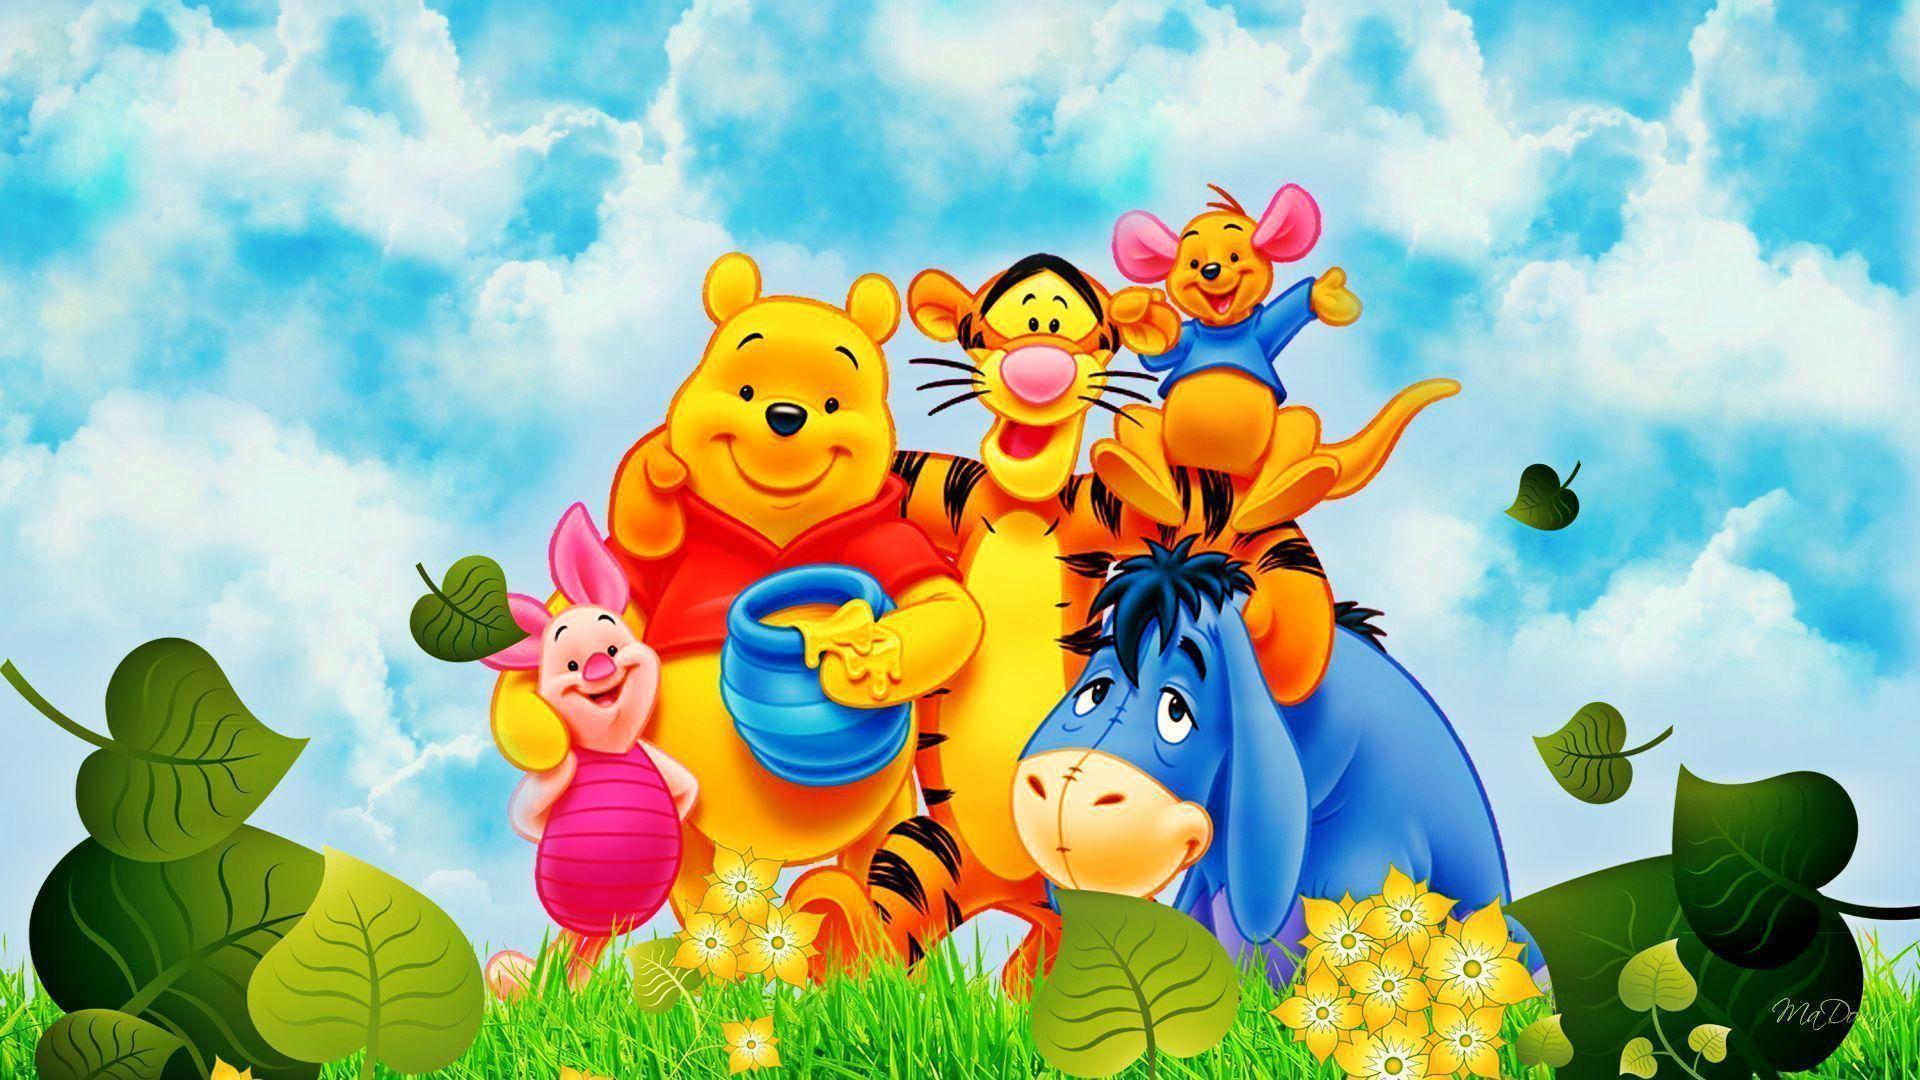 Winnie The Pooh Wallpaper For Android 13934 Full HD Wallpaper